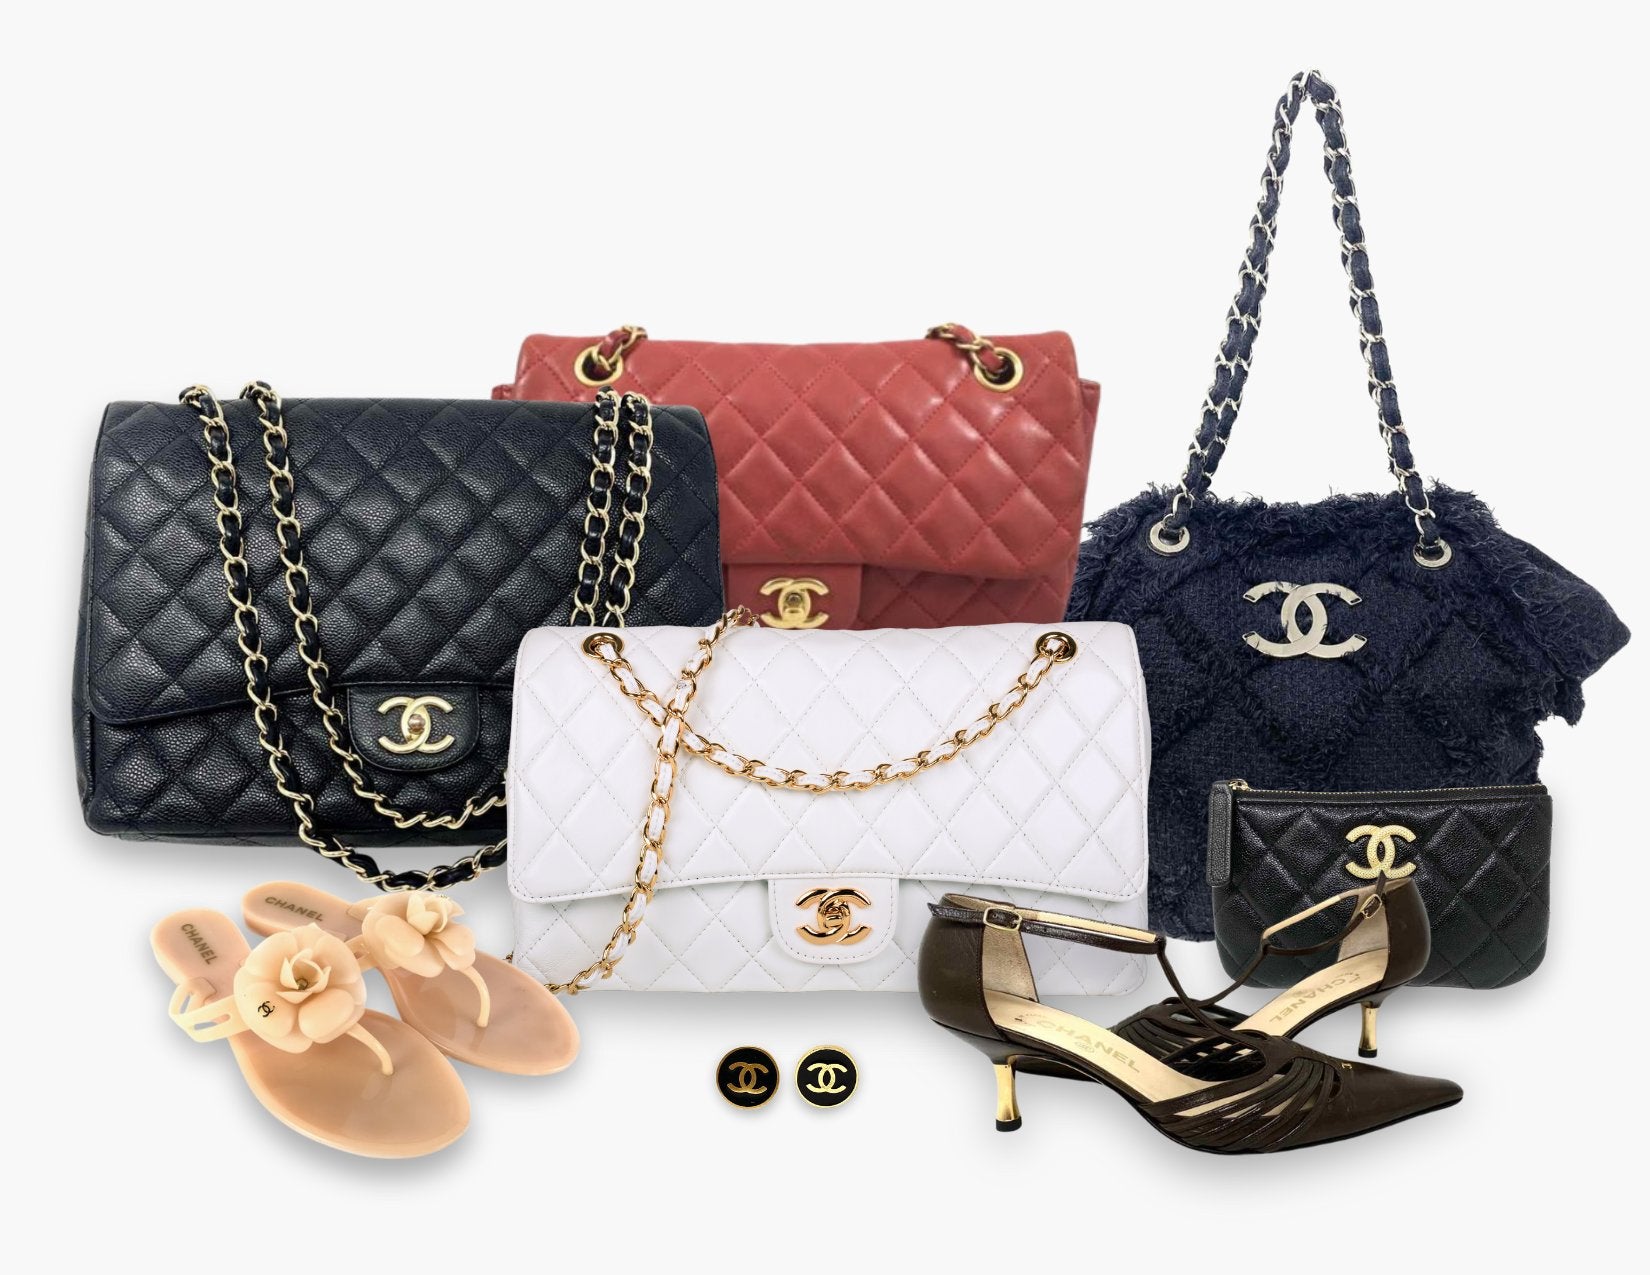 Chanel - Article Consignment %